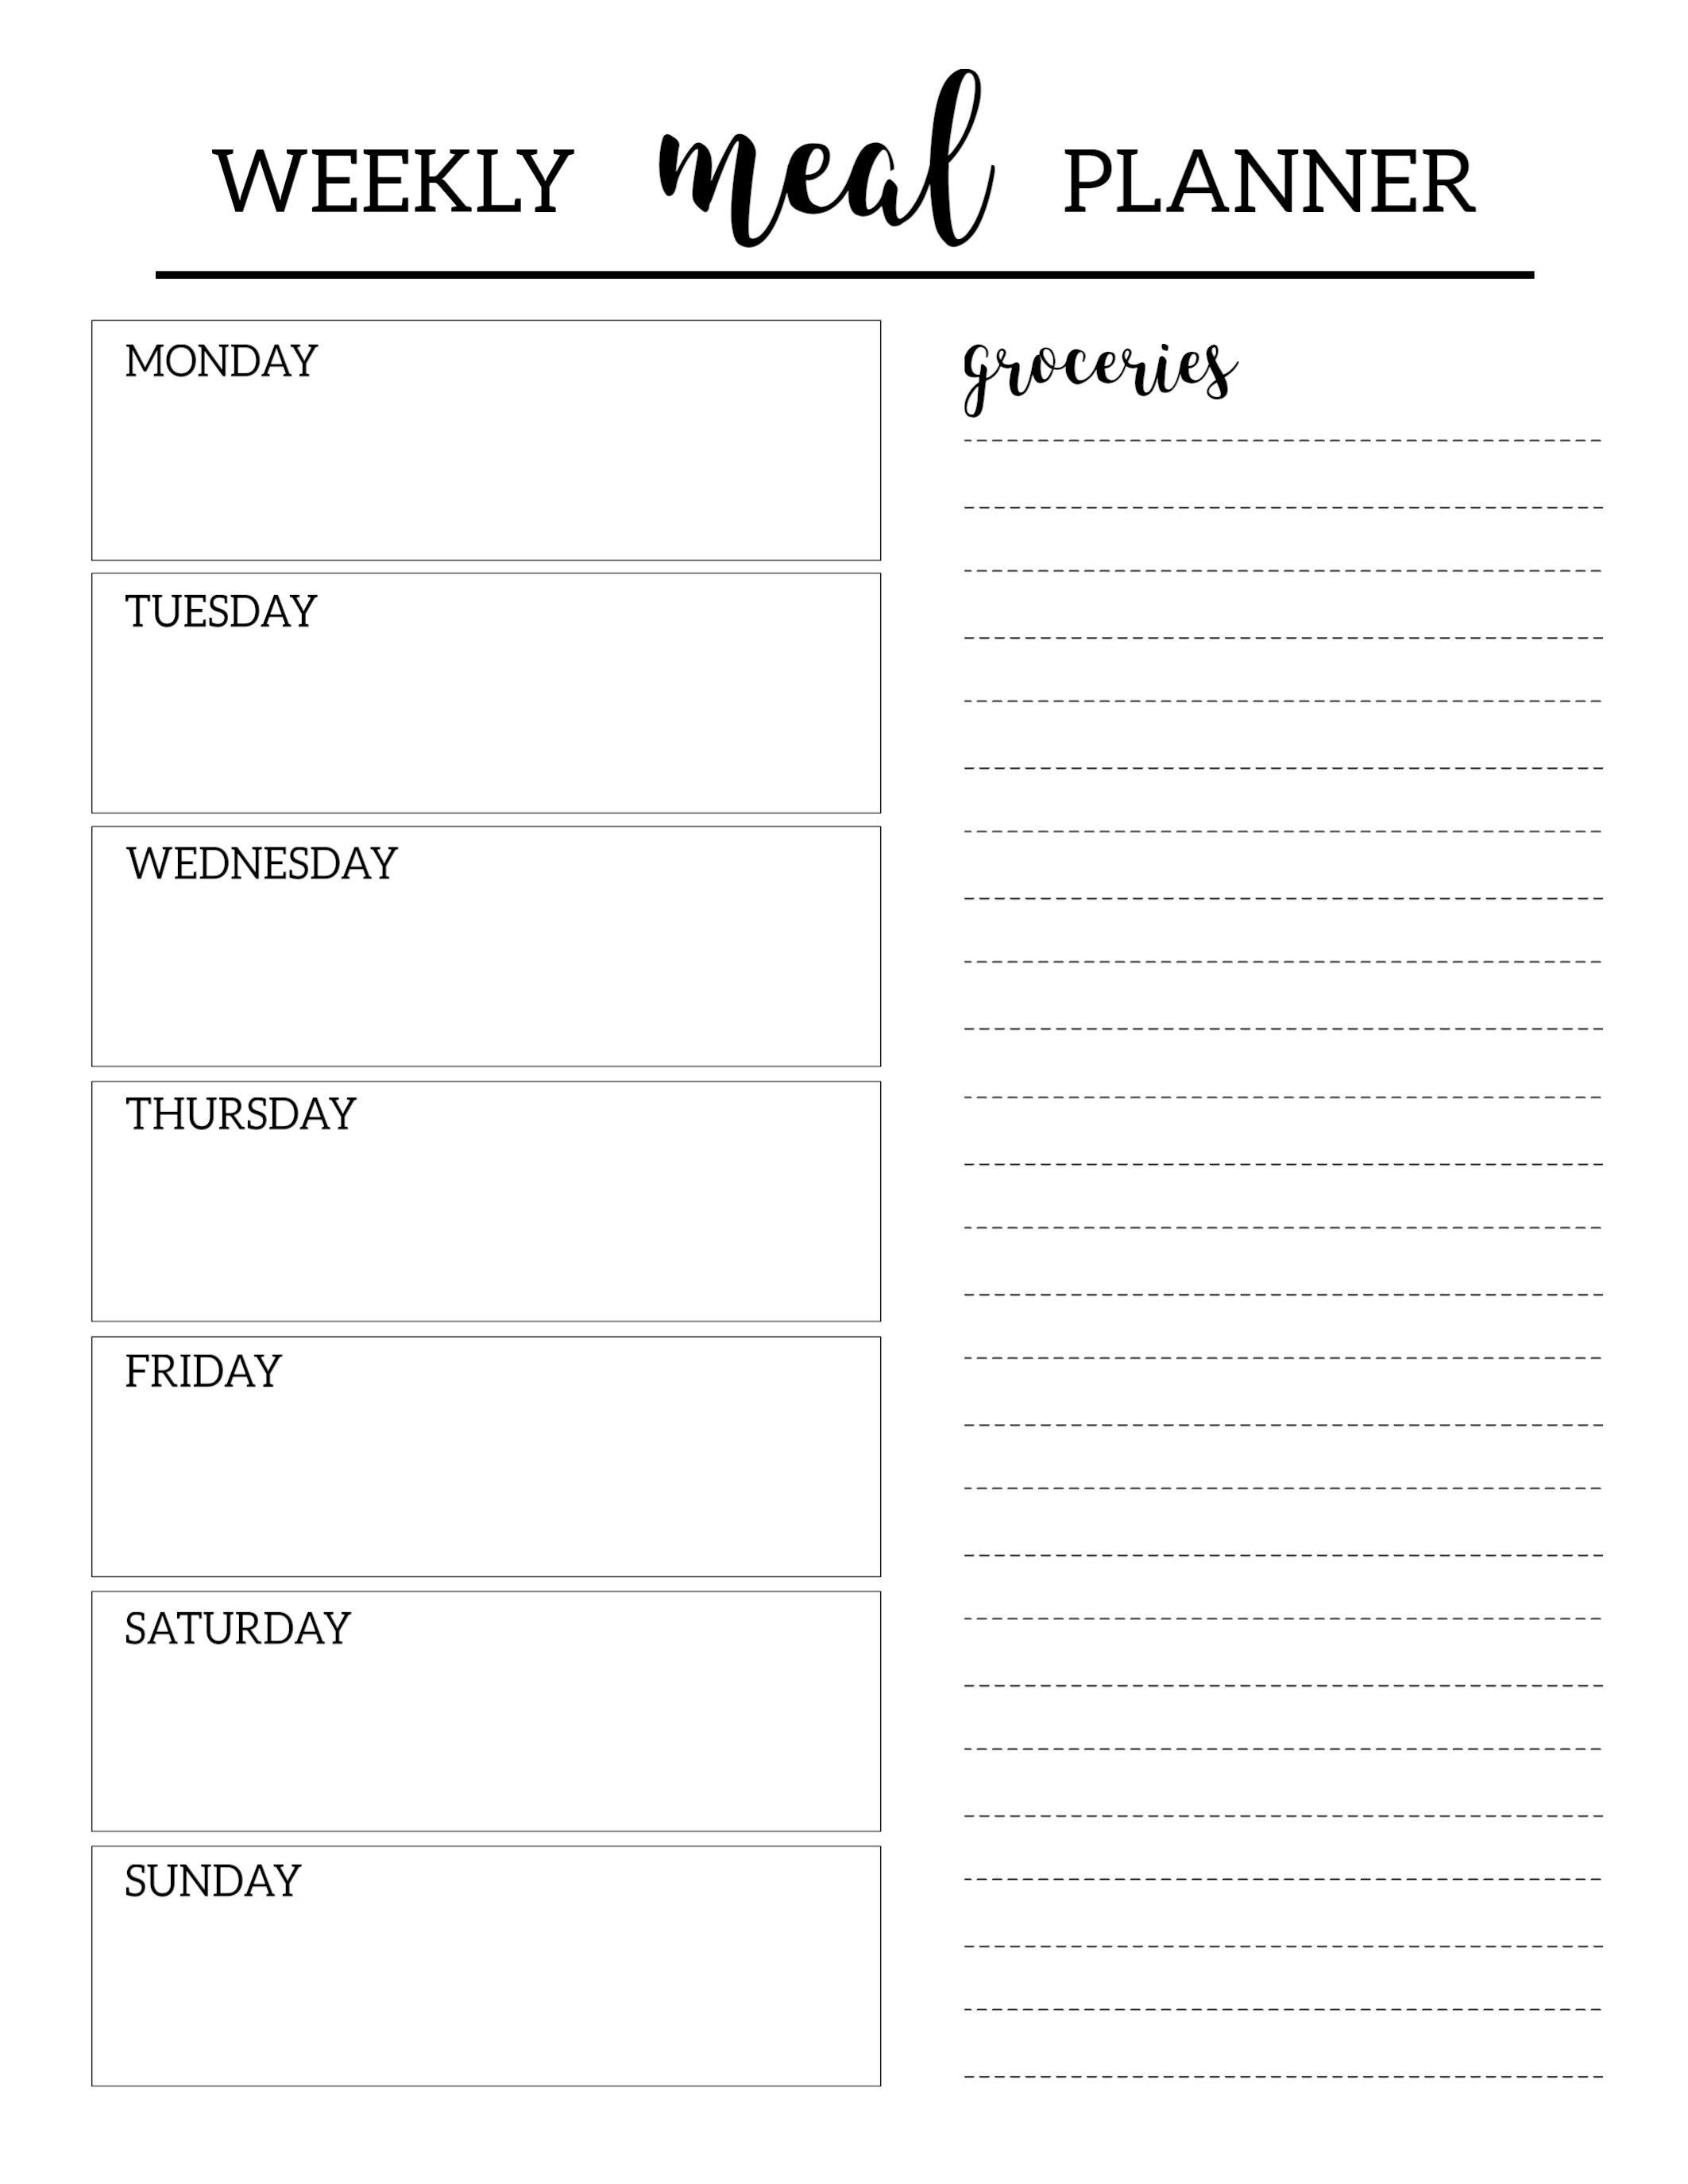 Free printable meal planner & grocery list | Jenallyson   The 